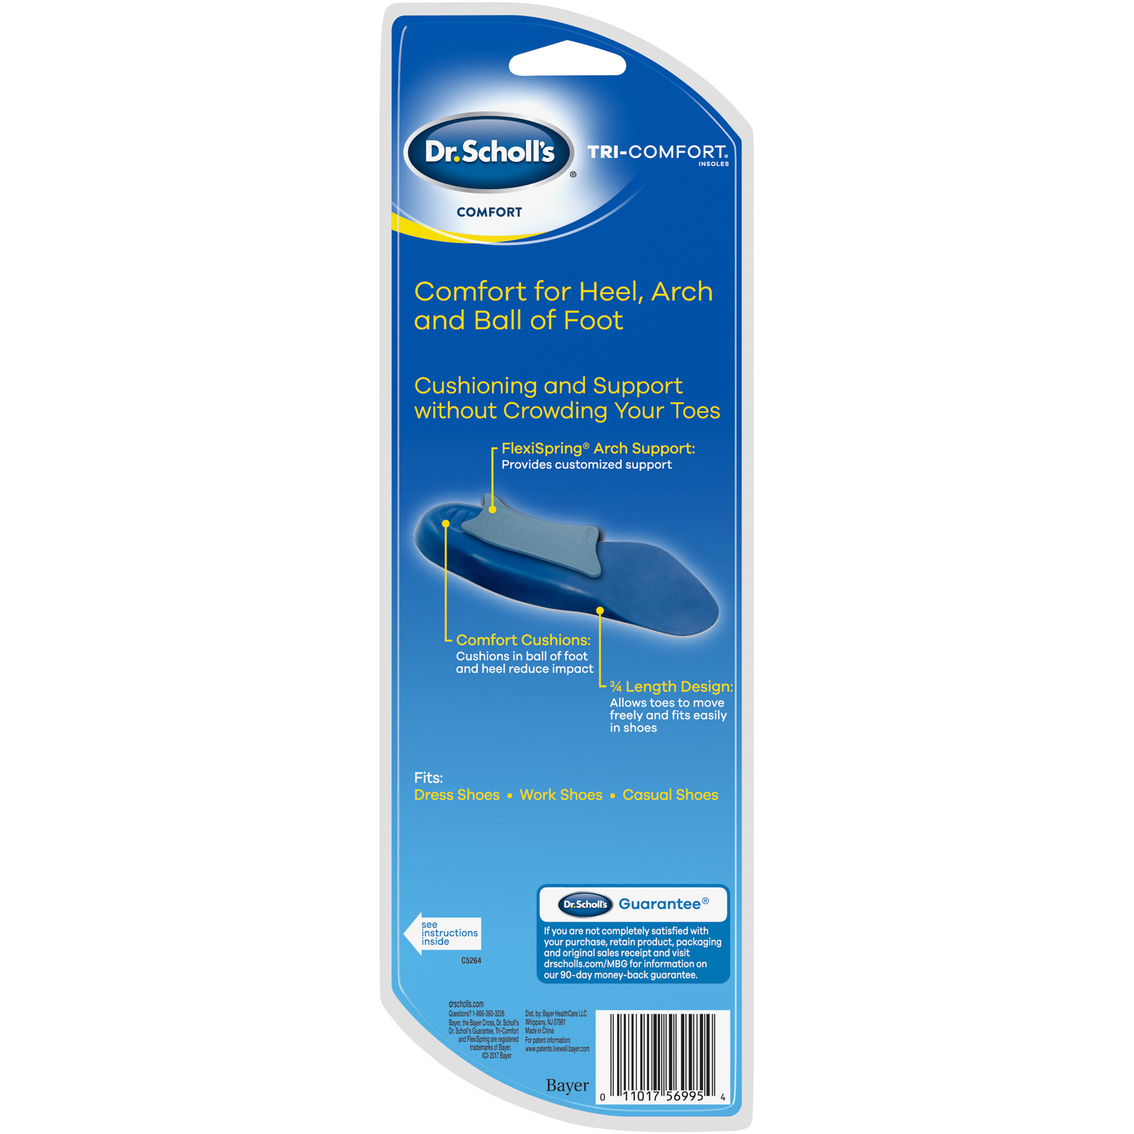 Dr. Scholl's Comfort Tri-Comfort Insoles for Women, 1 Pair - Image 2 of 5